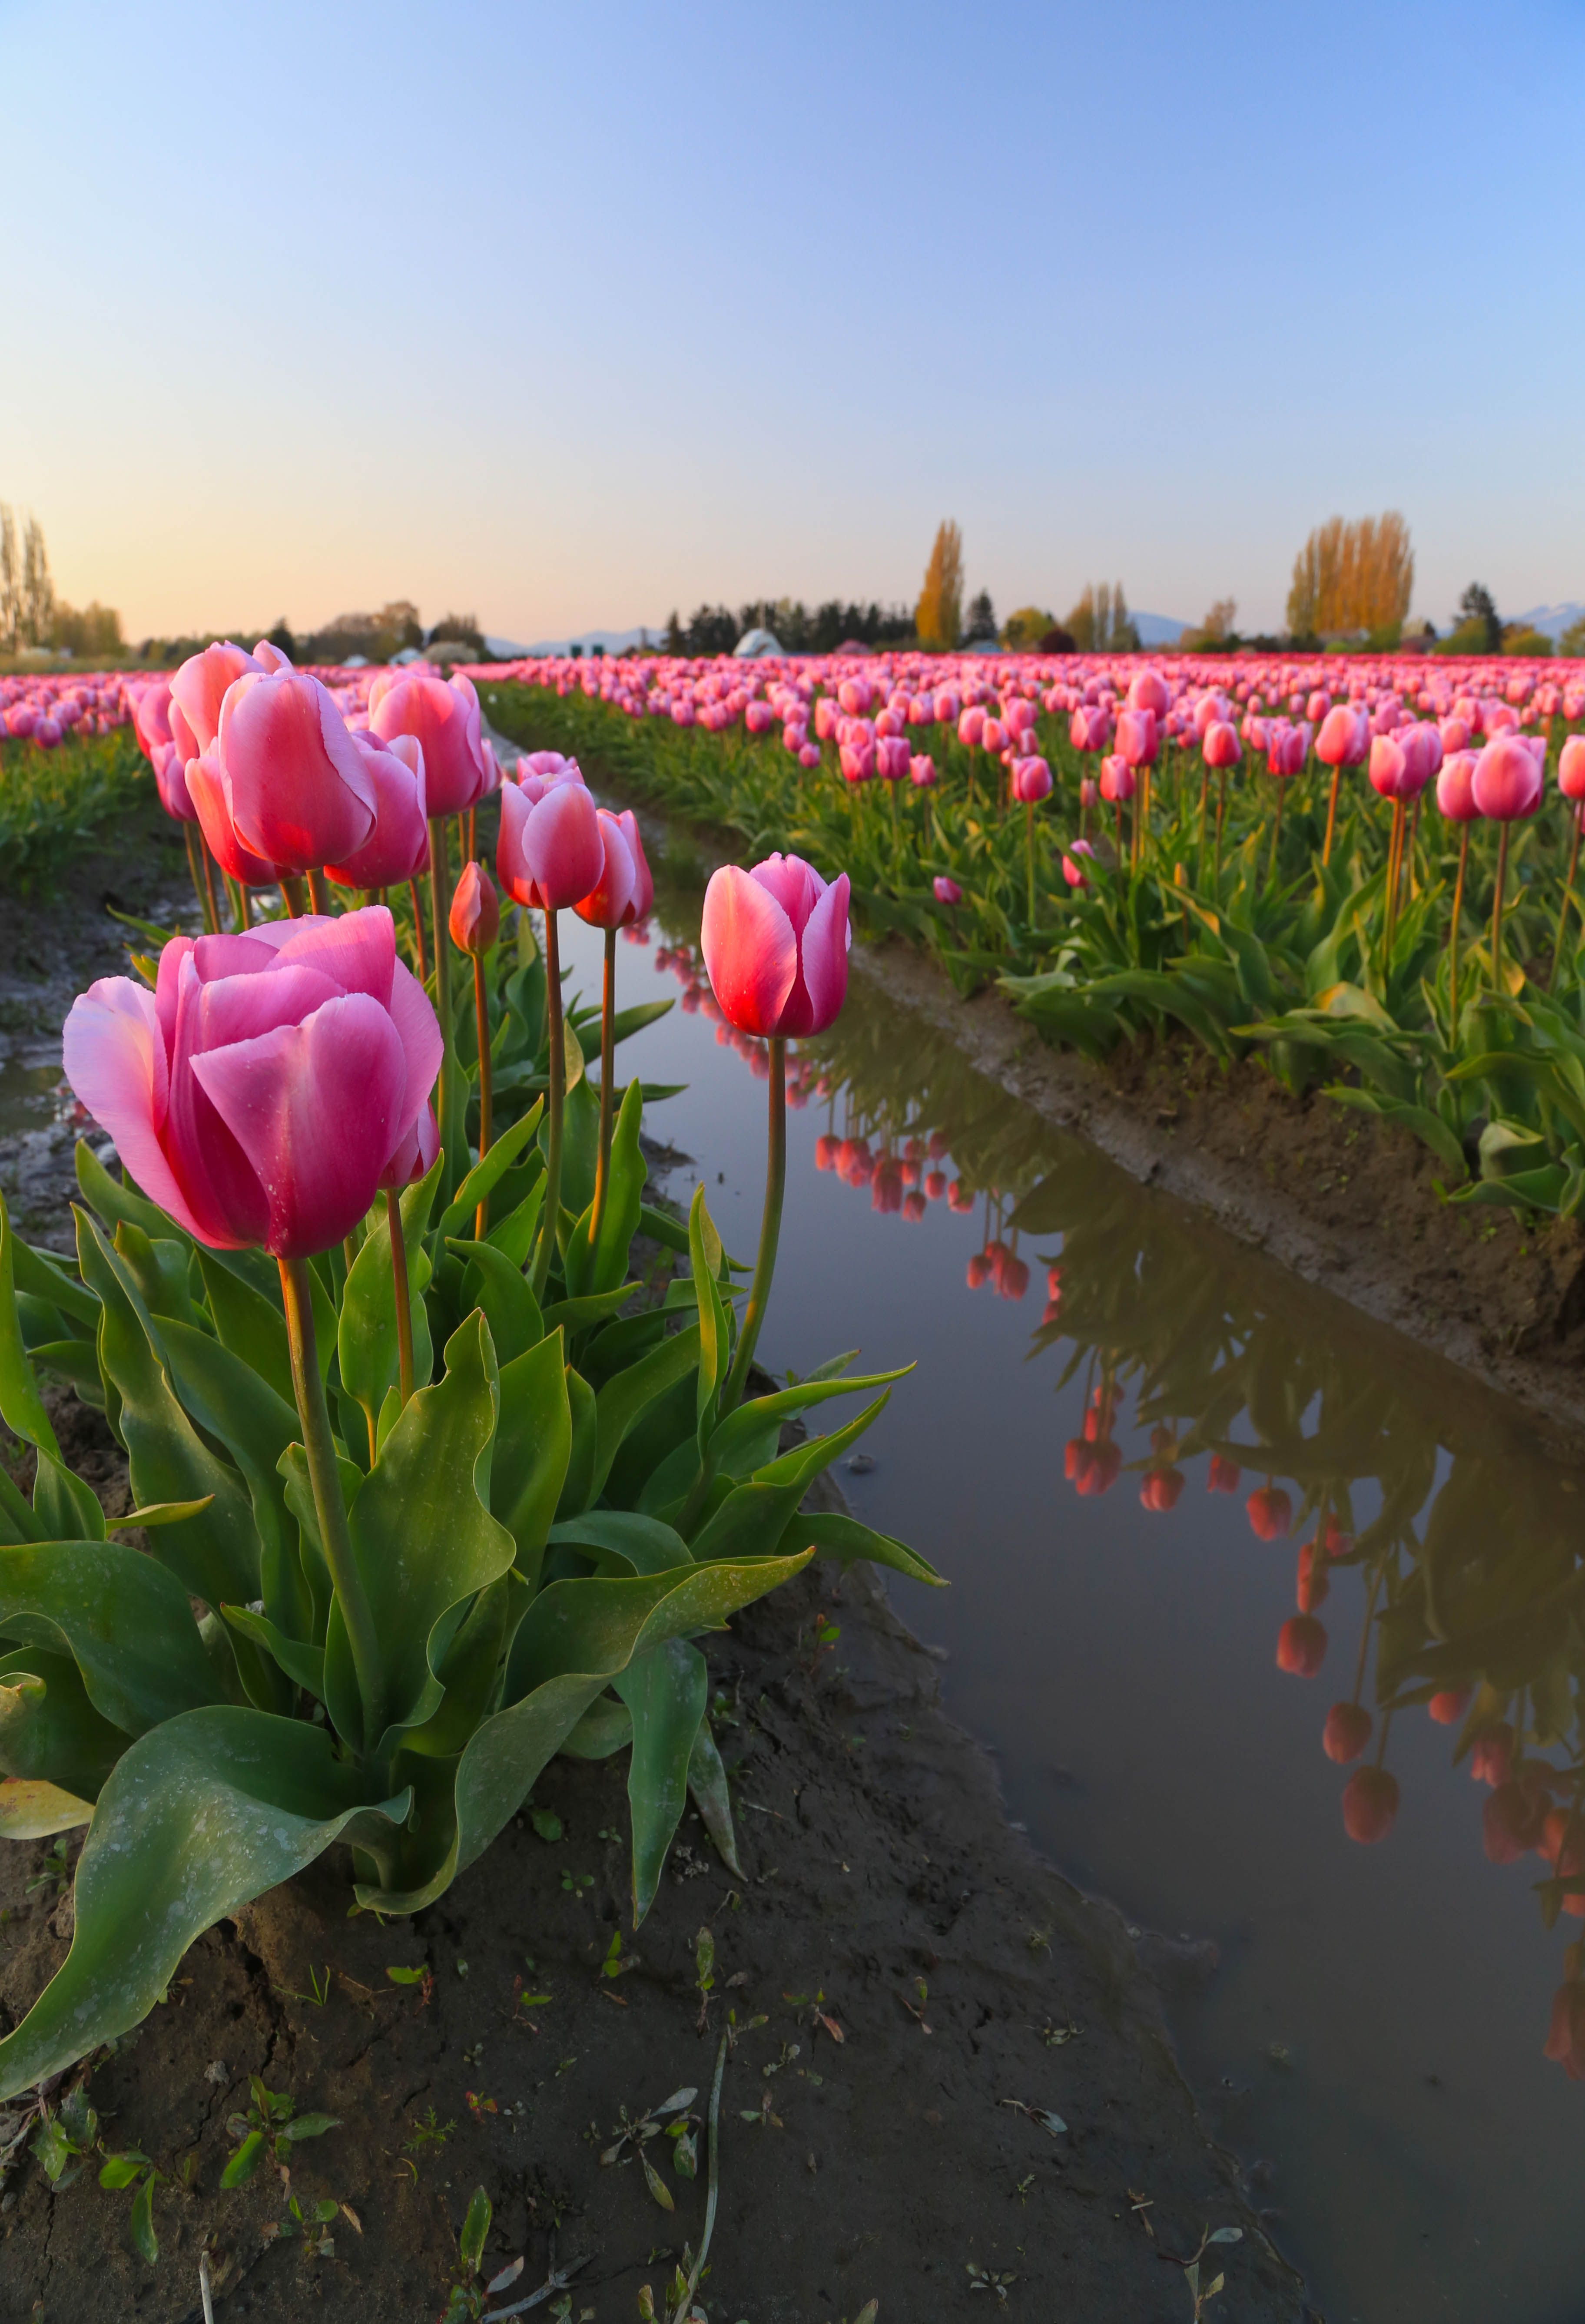 SKAGIT VALLEY TULIP FESTIVAL - Andy Porter Images